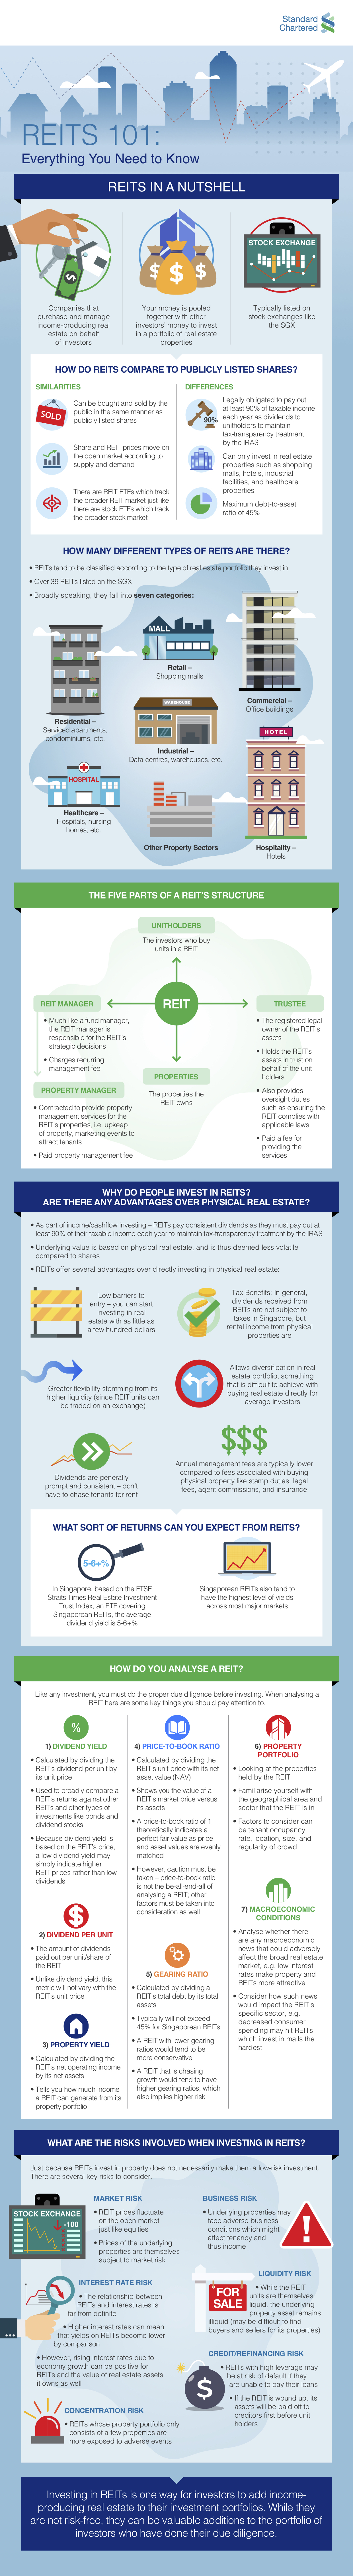 Sg infographic reits